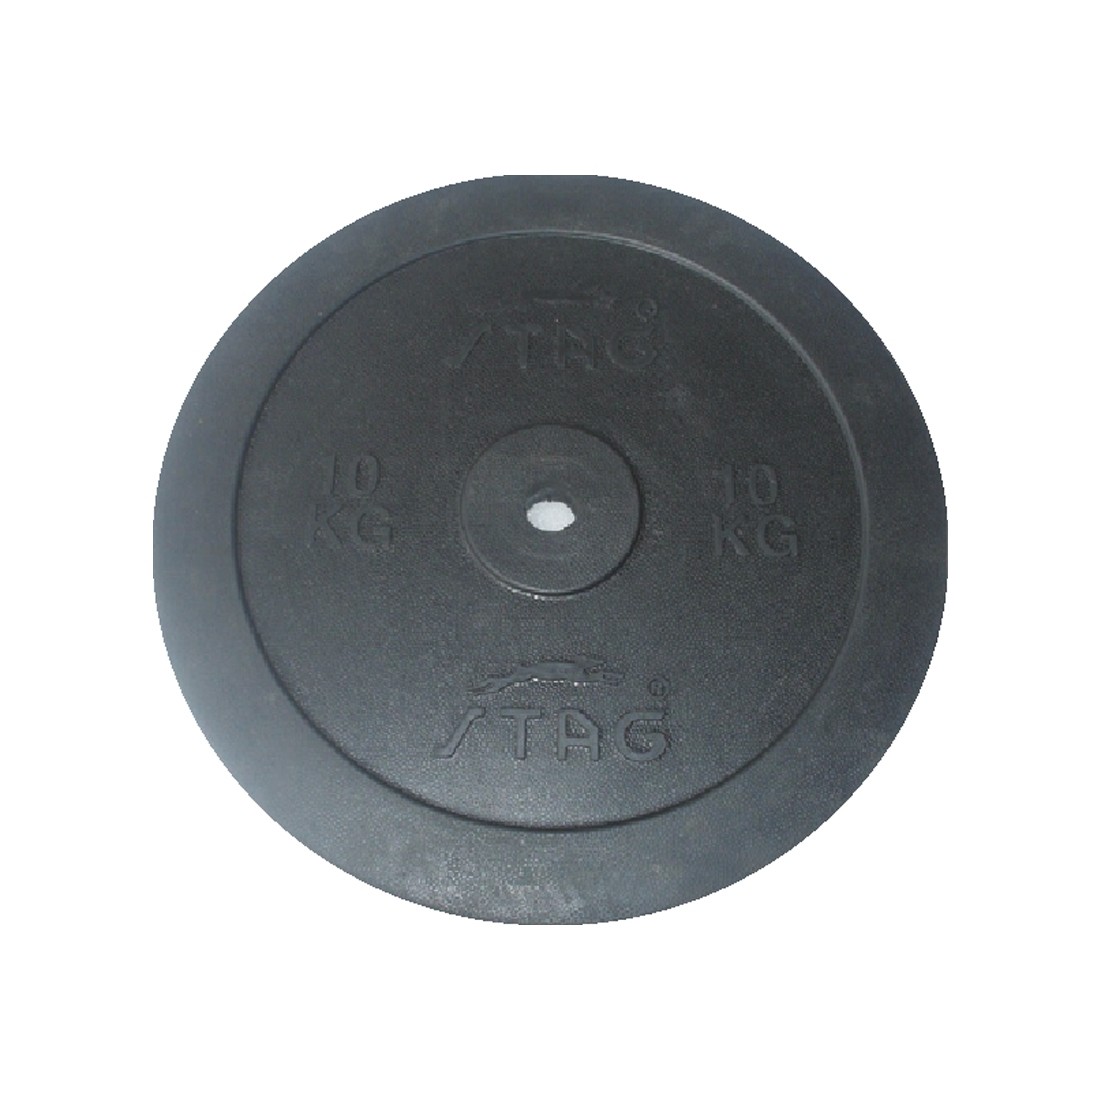 STAG WEIGHT TRAINING WEIGHTS BLACK (PER KG)